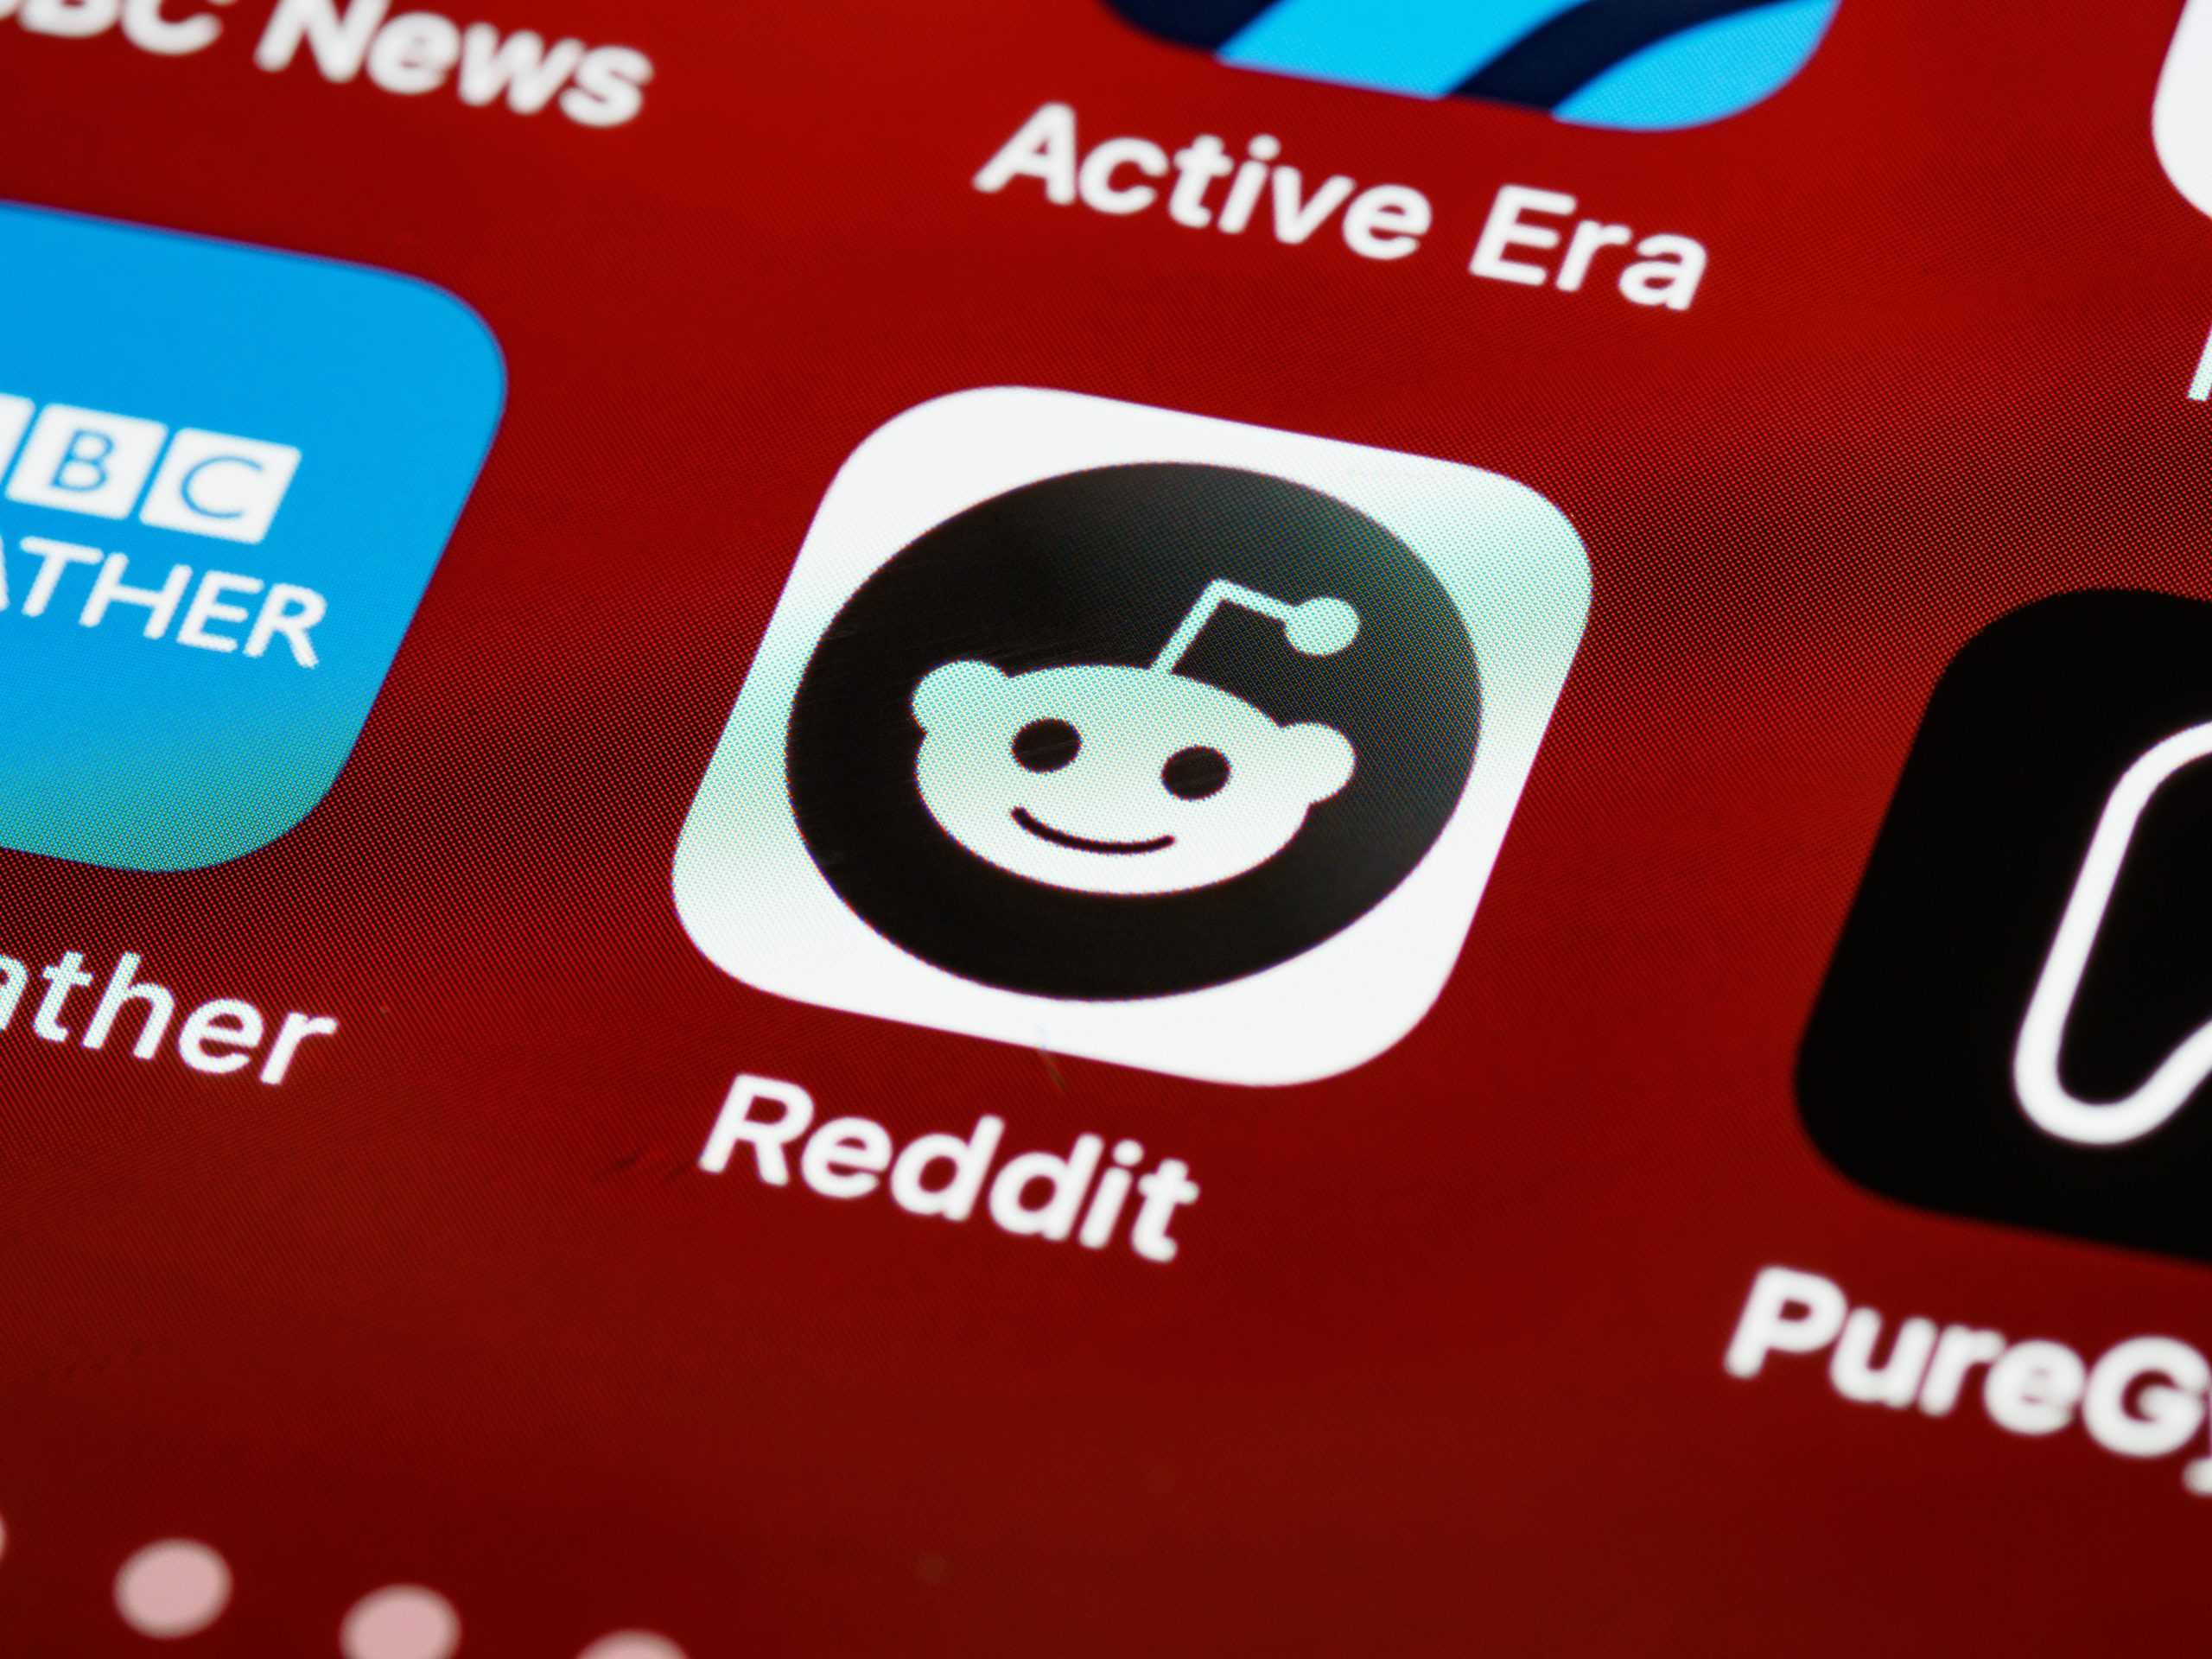 What Reddit did for accountability